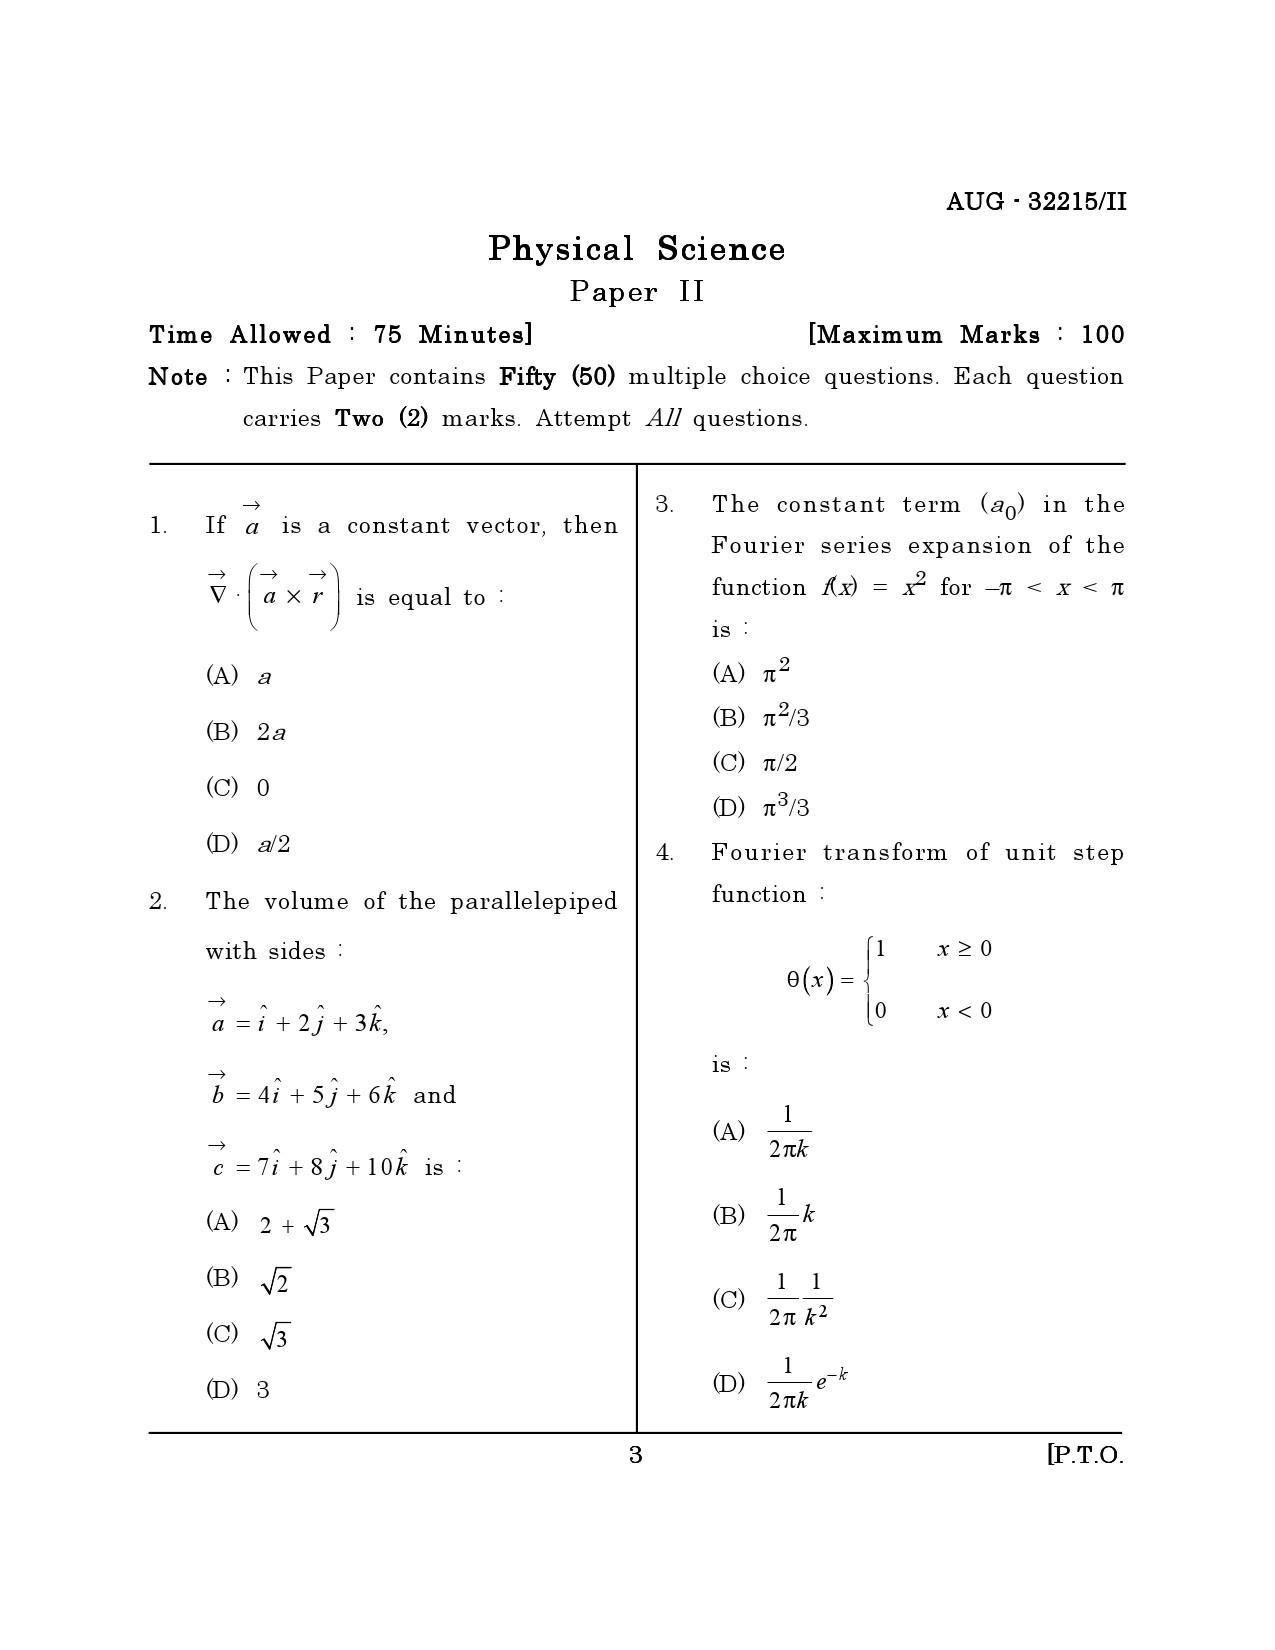 Maharashtra SET Physical Science Question Paper II August 2015 2